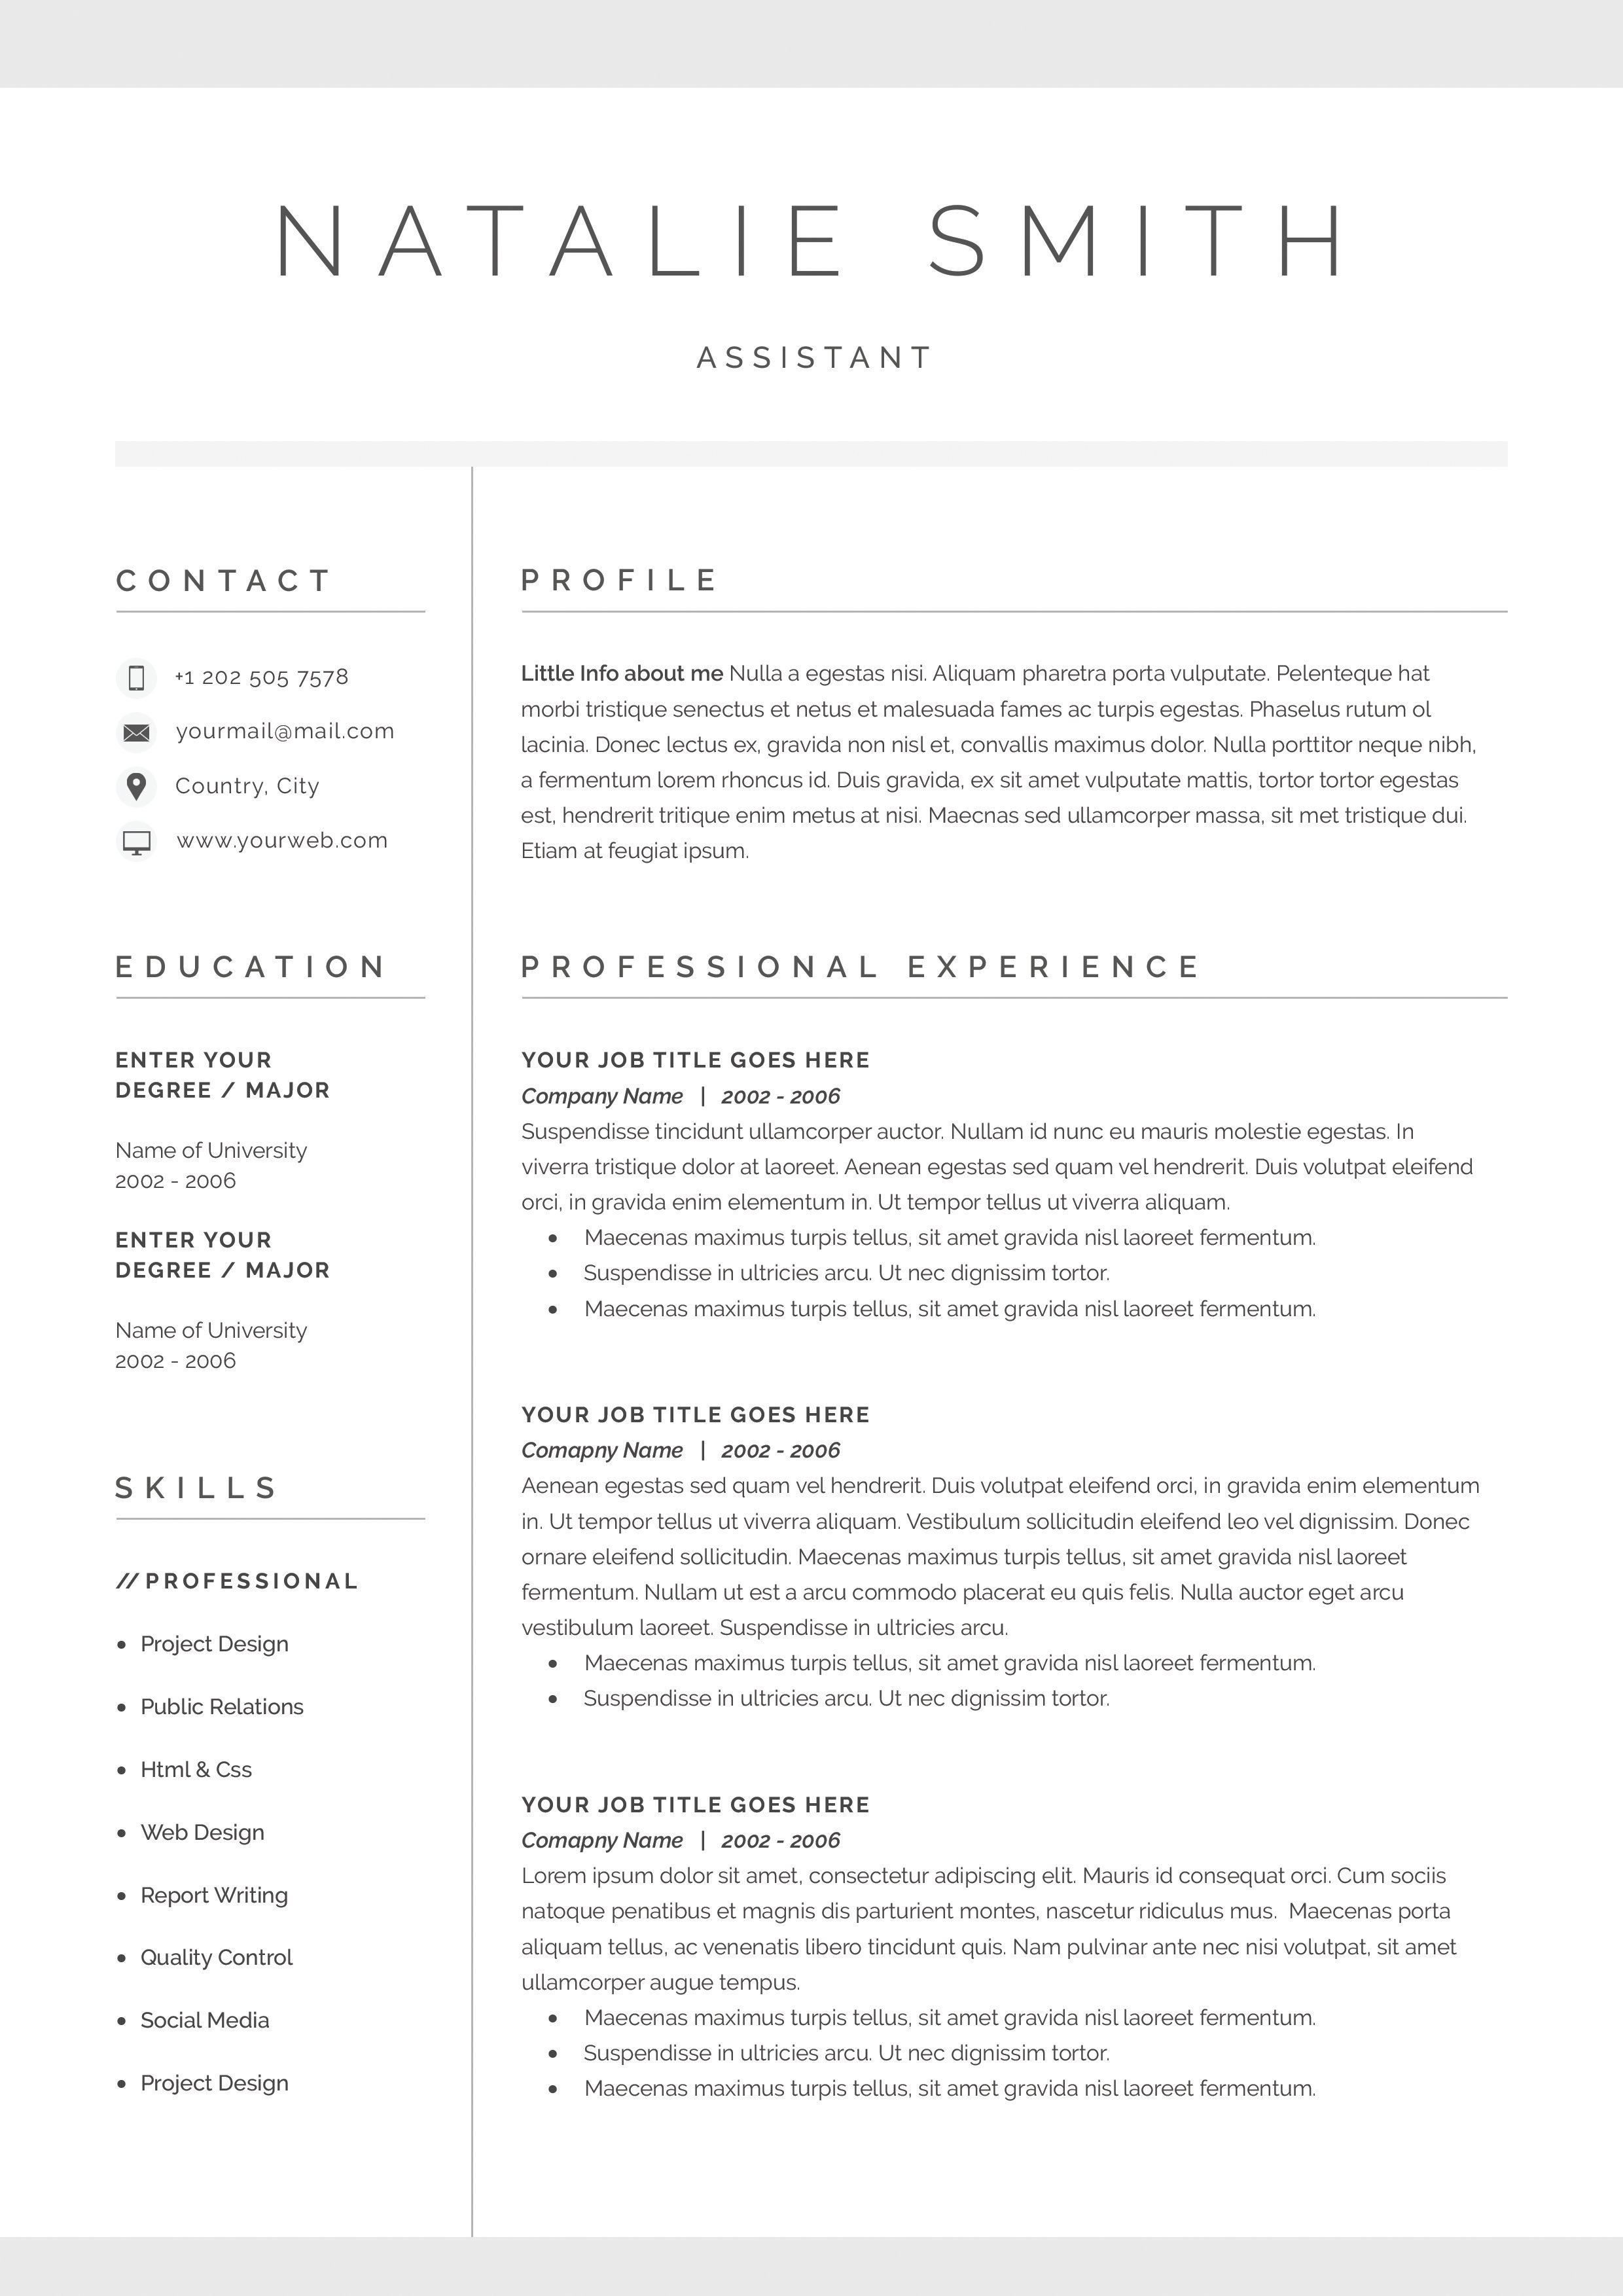 Professional resume template for a job.